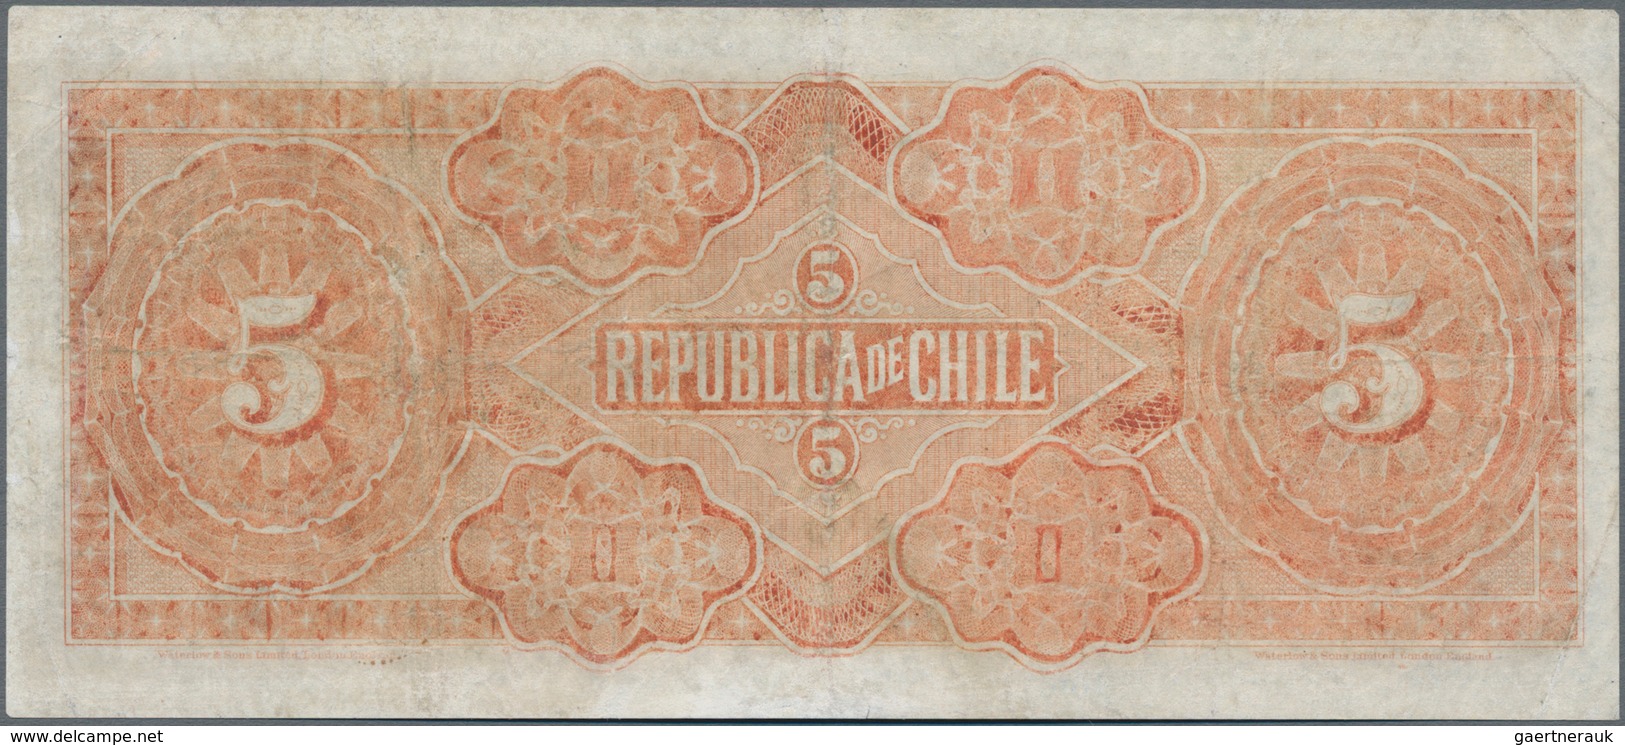 Chile: Republica De Chile 5 Pesos 1918, P.18, Great Condition With Strong Paper, Some Folds And Ligh - Chili